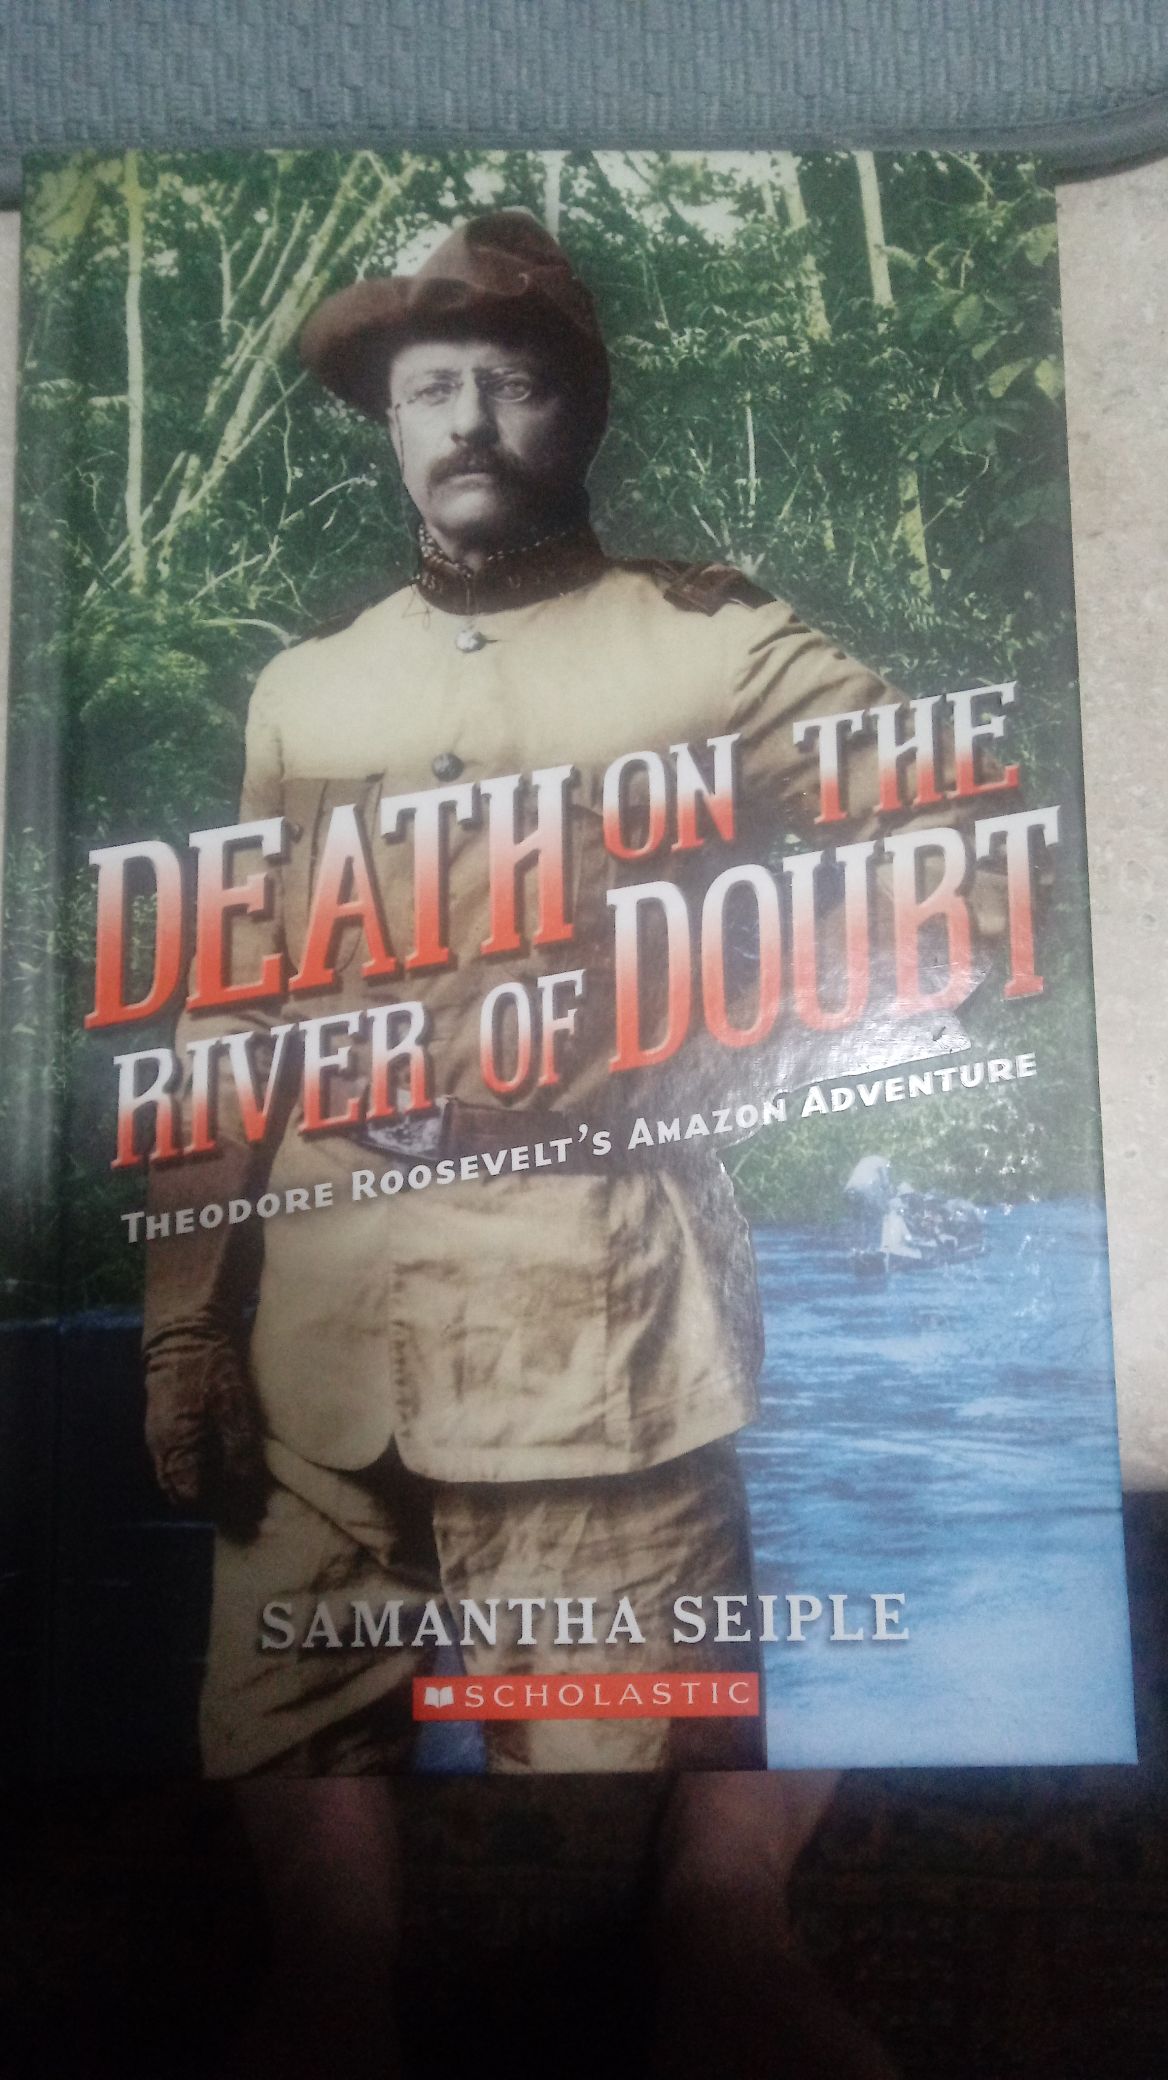 death on the River of Doubt Theodore Roosevelt’s Amazing Adventure - Samantha Seiple book collectible [Barcode 9781338127713] - Main Image 1